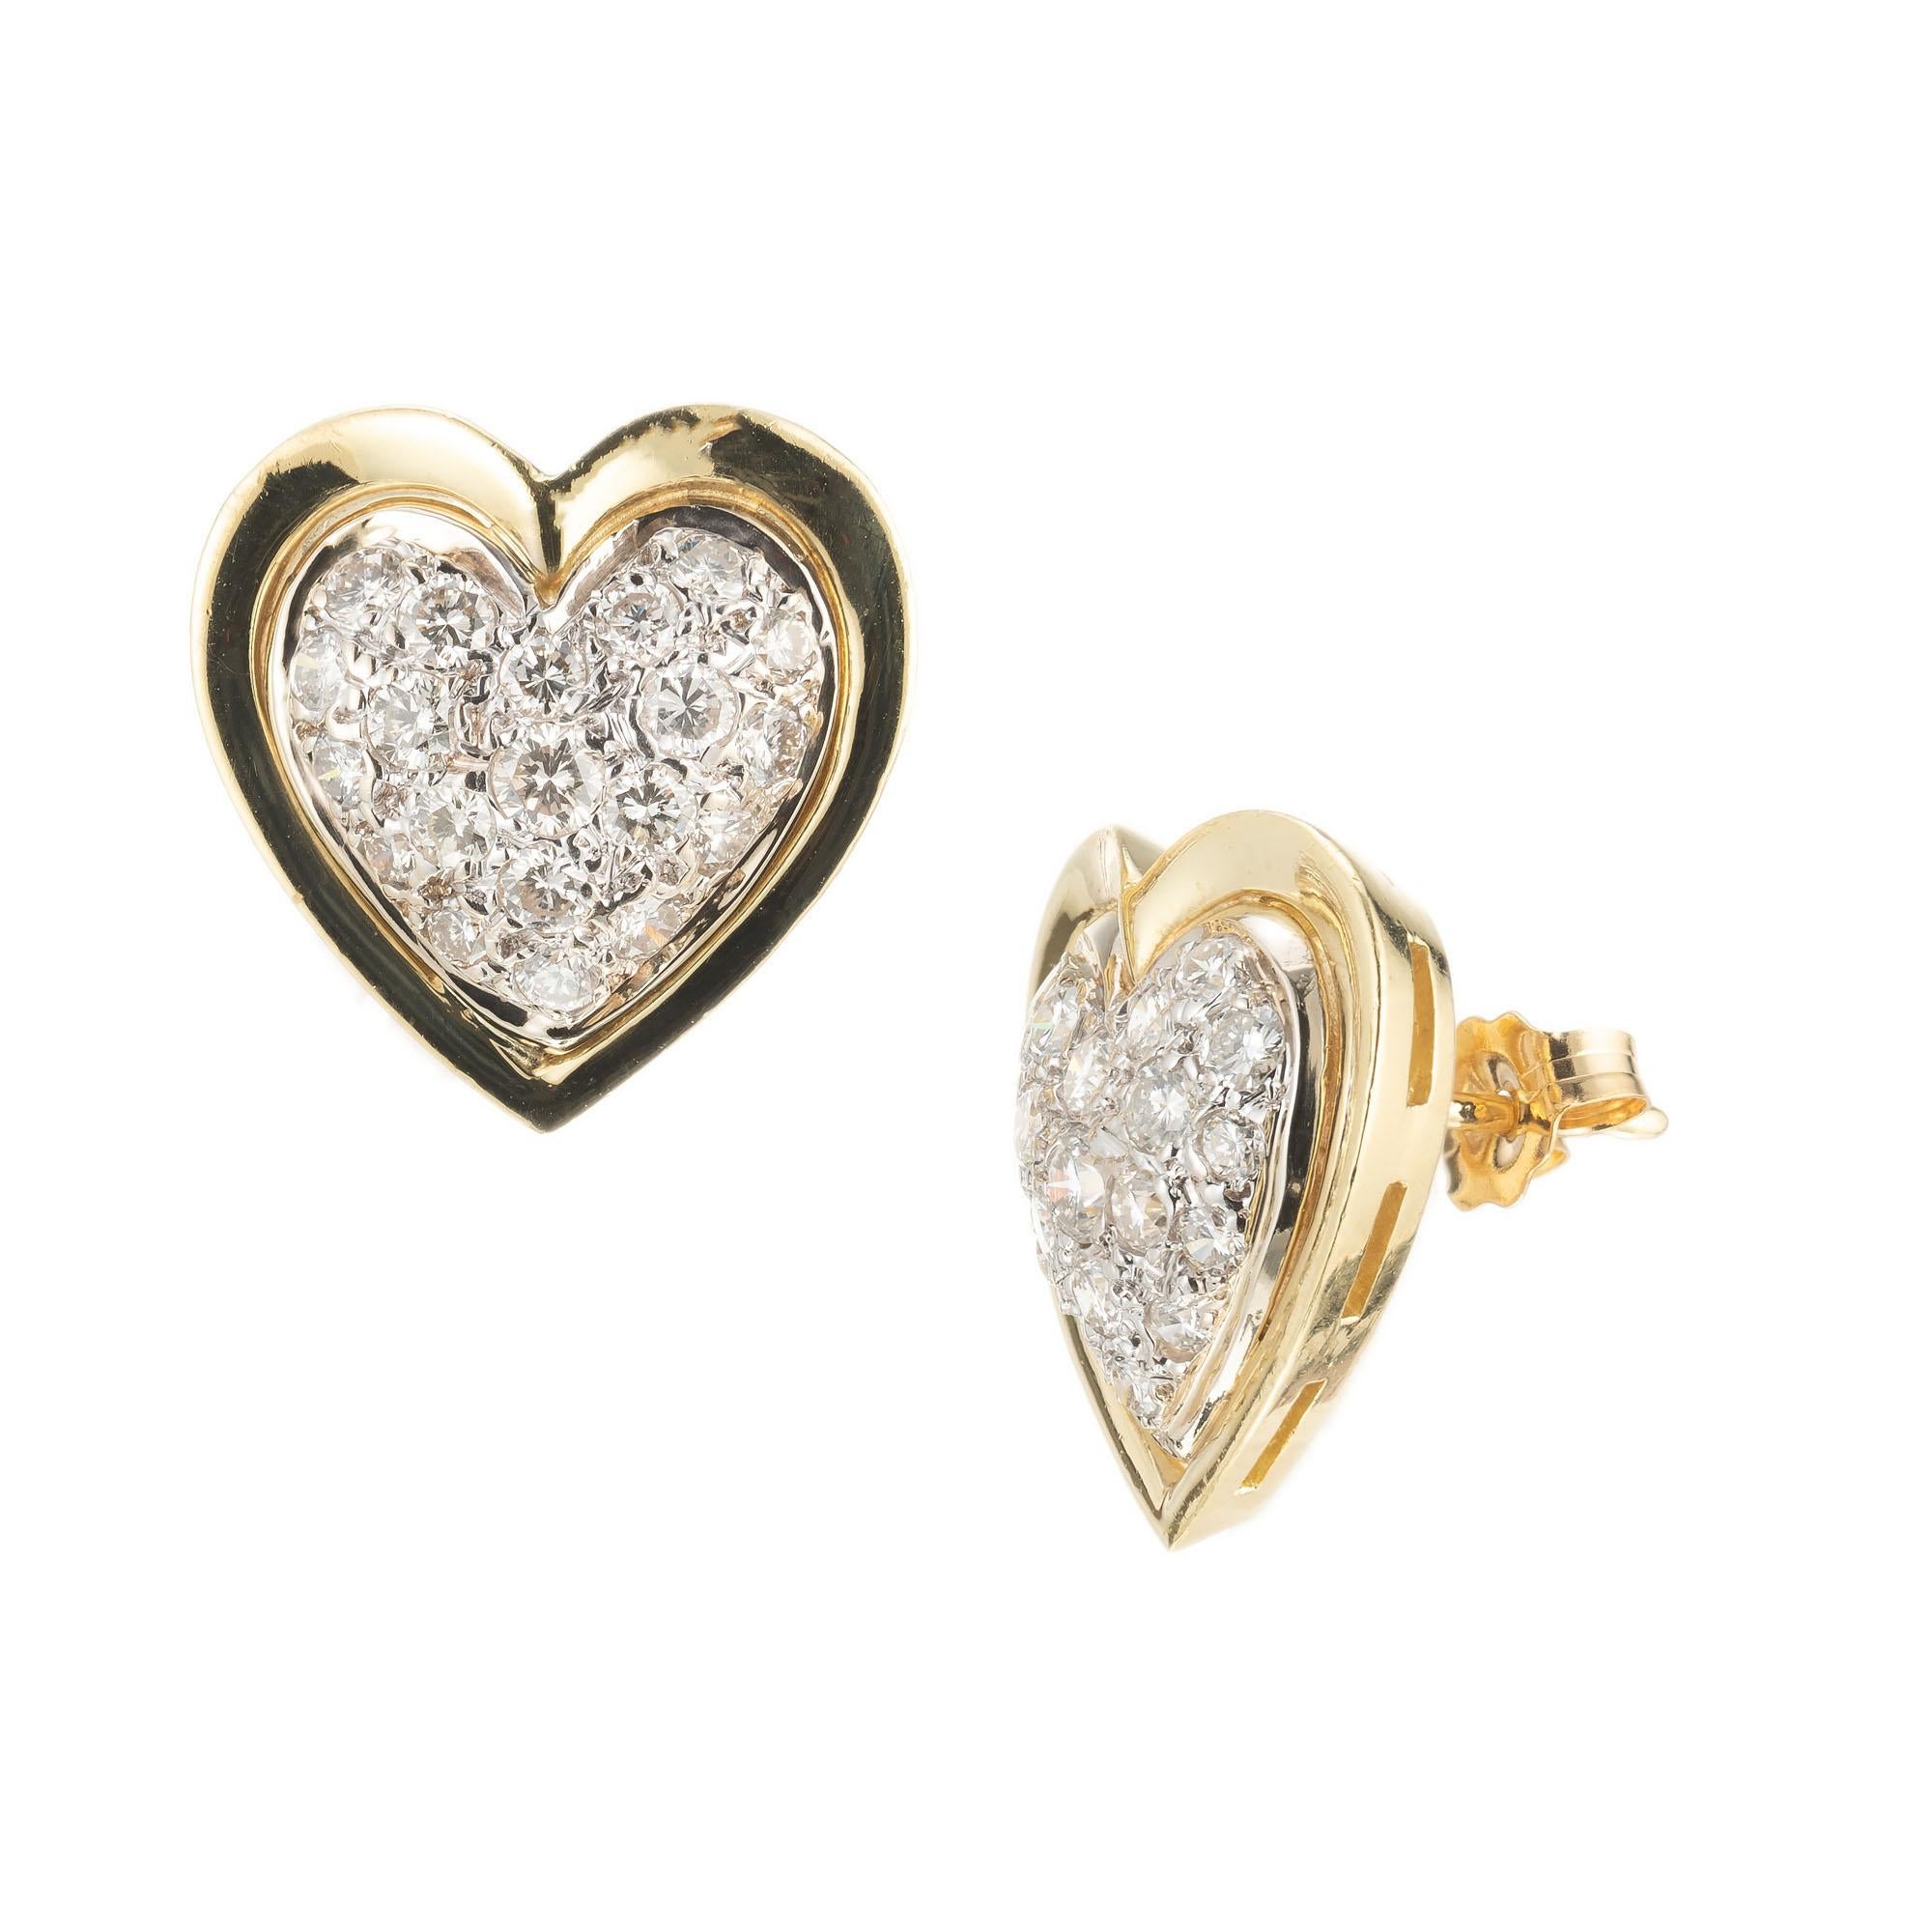 1960's Diamond heart earrings in 18k yellow and white gold. 40 round brilliant cut pave set diamonds.

40 round brilliant cut diamonds, G VS approx. .90cts
18k yellow gold 
18k white gold 
Stamped: 18k
Top to bottom: 15.6mm or 5/8 Inch
Width: 15.4mm